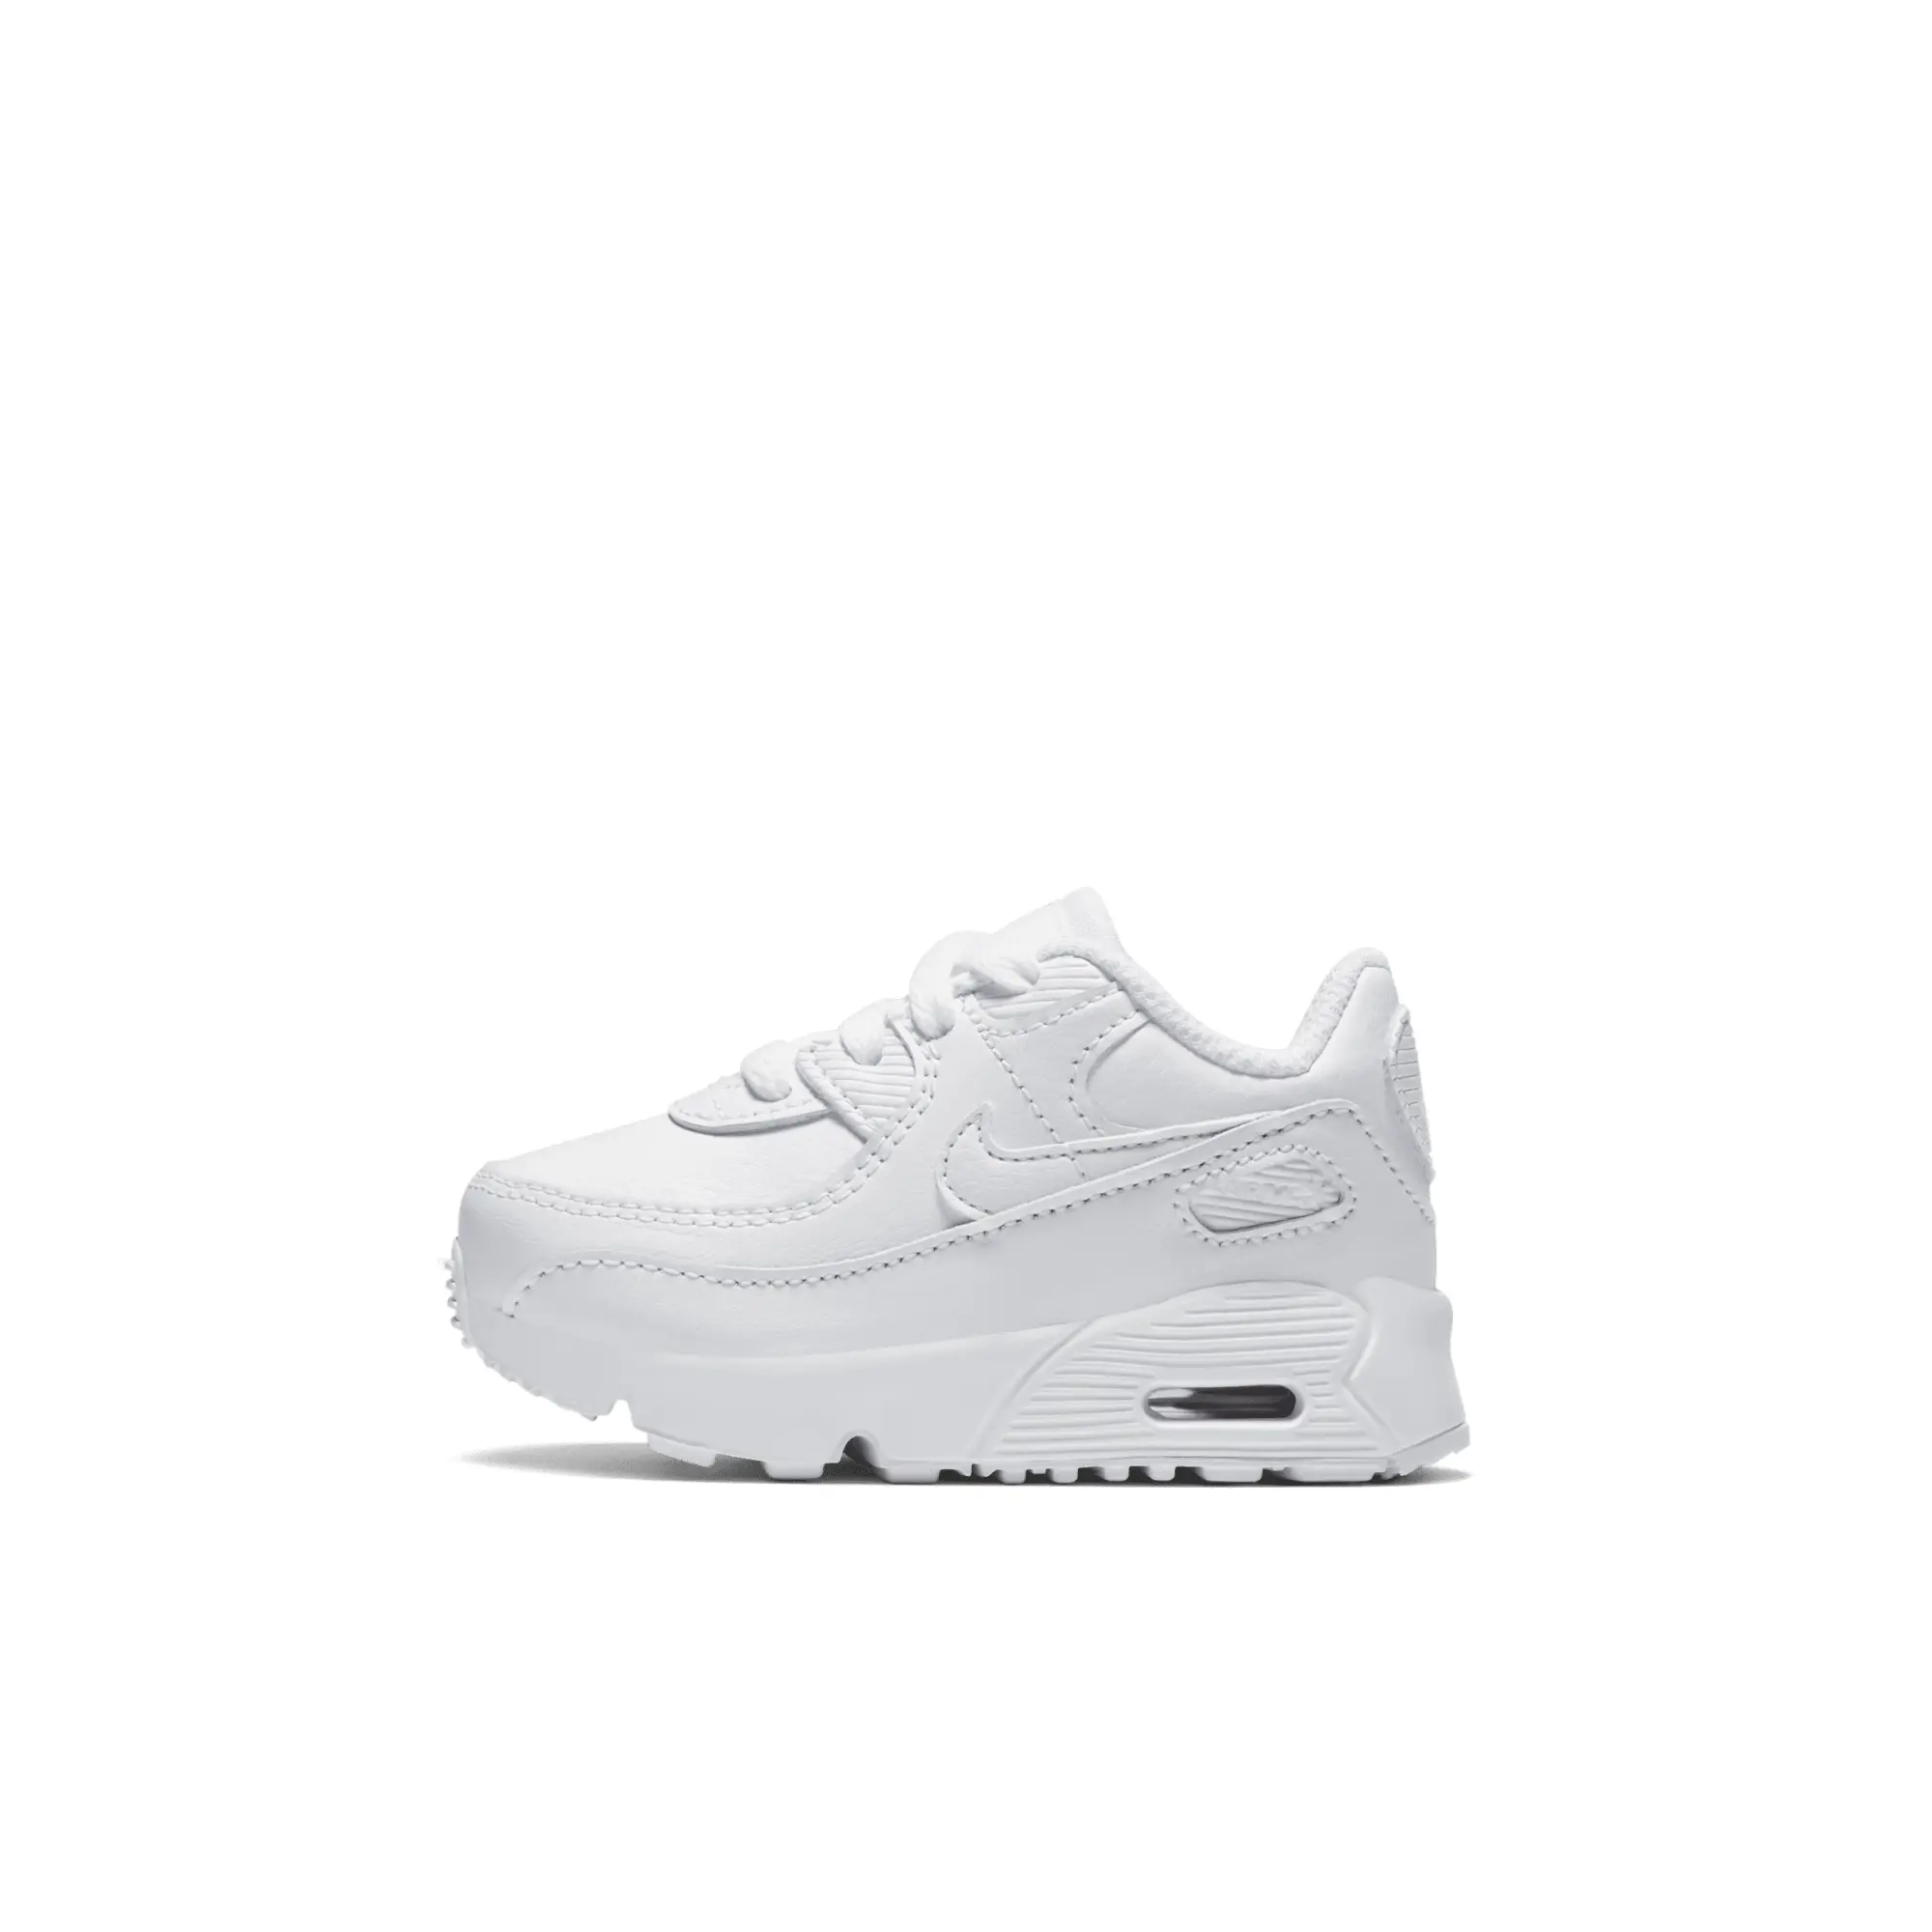 Nike Air Max 90 LTR Baby/Toddler Shoes - White